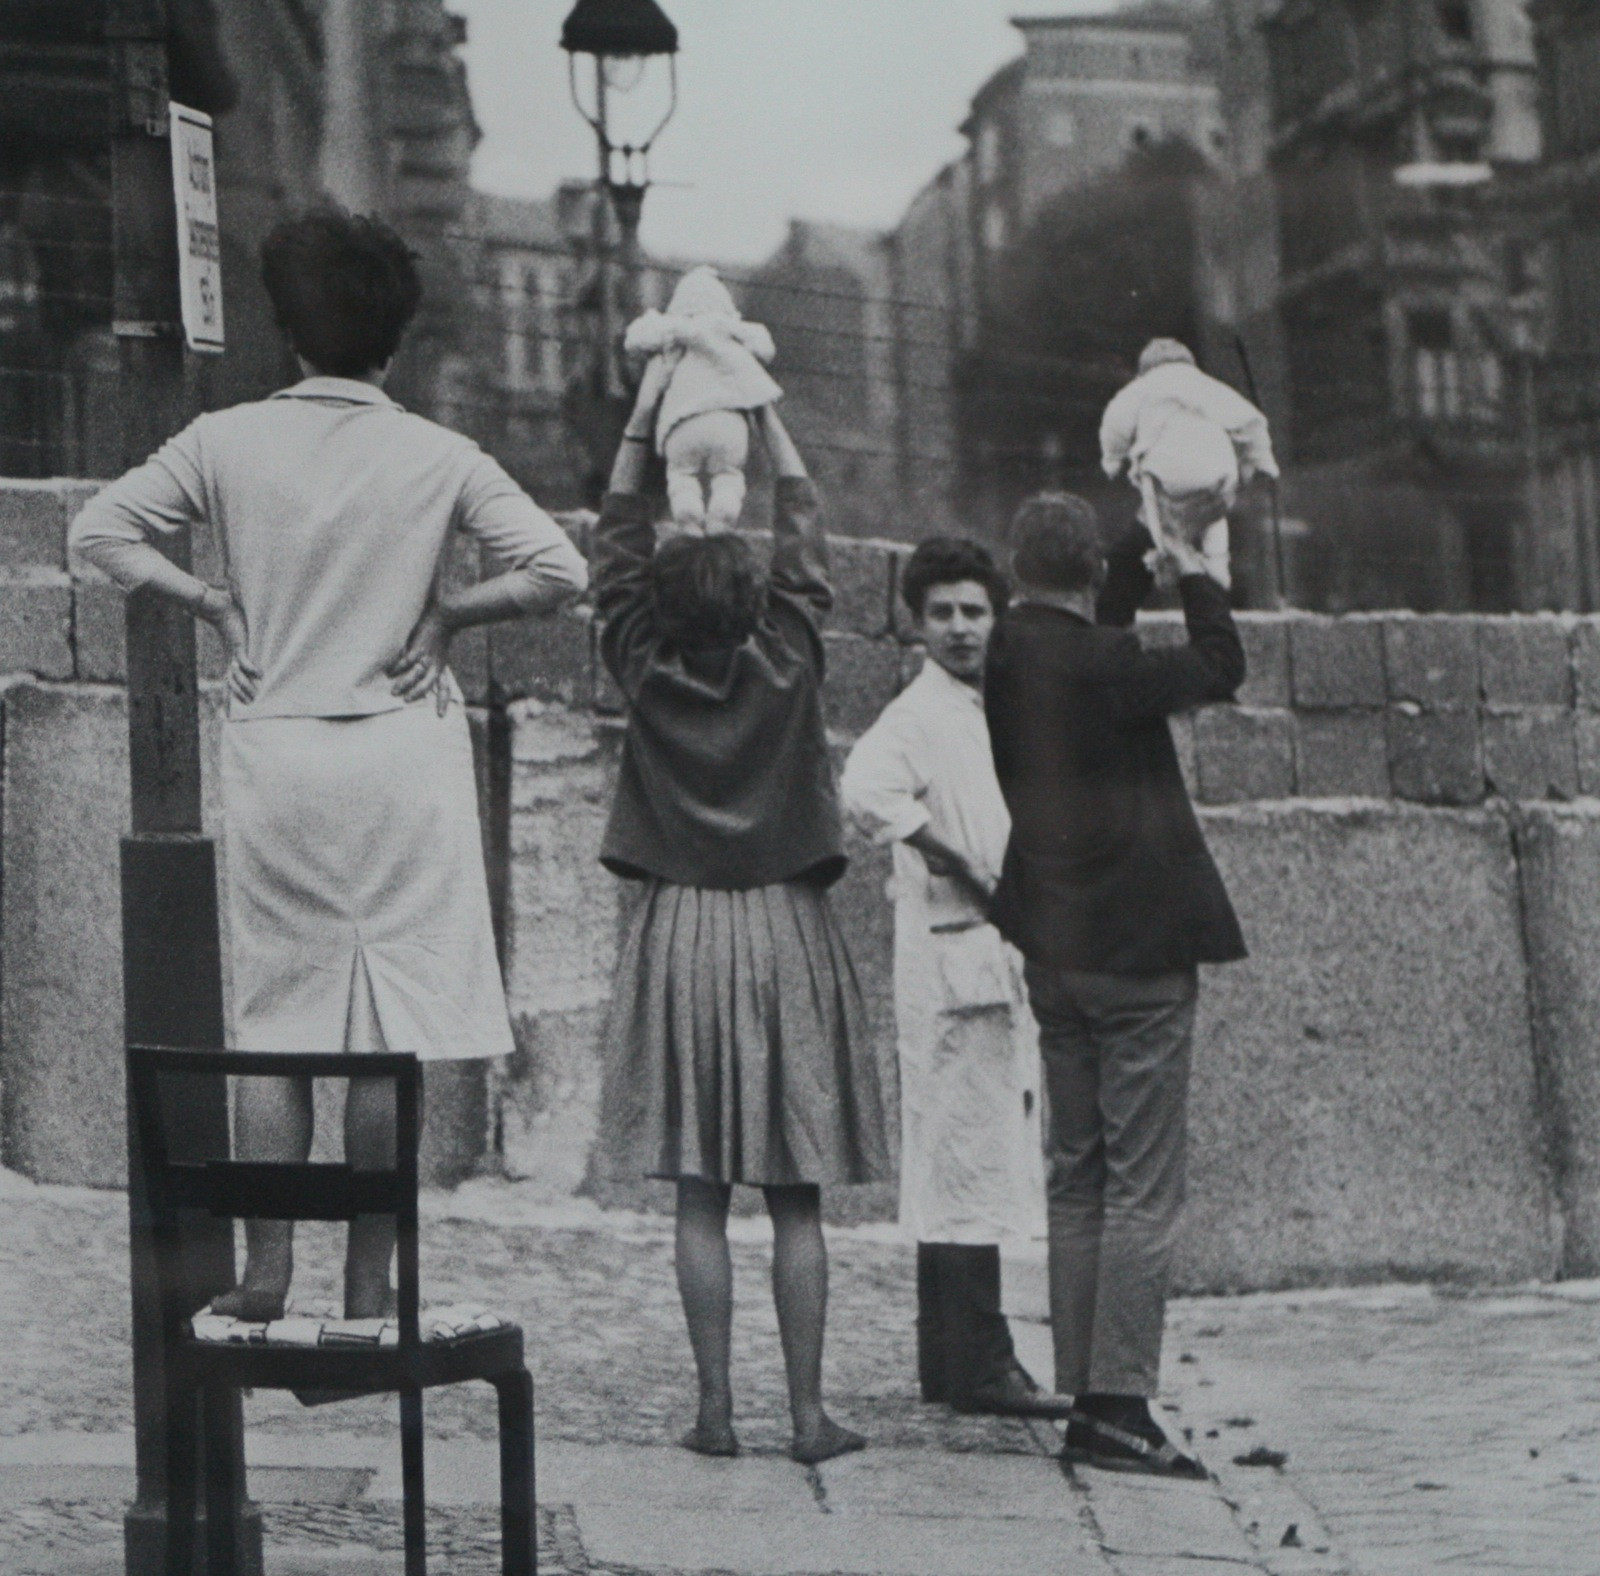 Residents of West Berlin show children to their grandparents who reside on the Eastern side, 1961